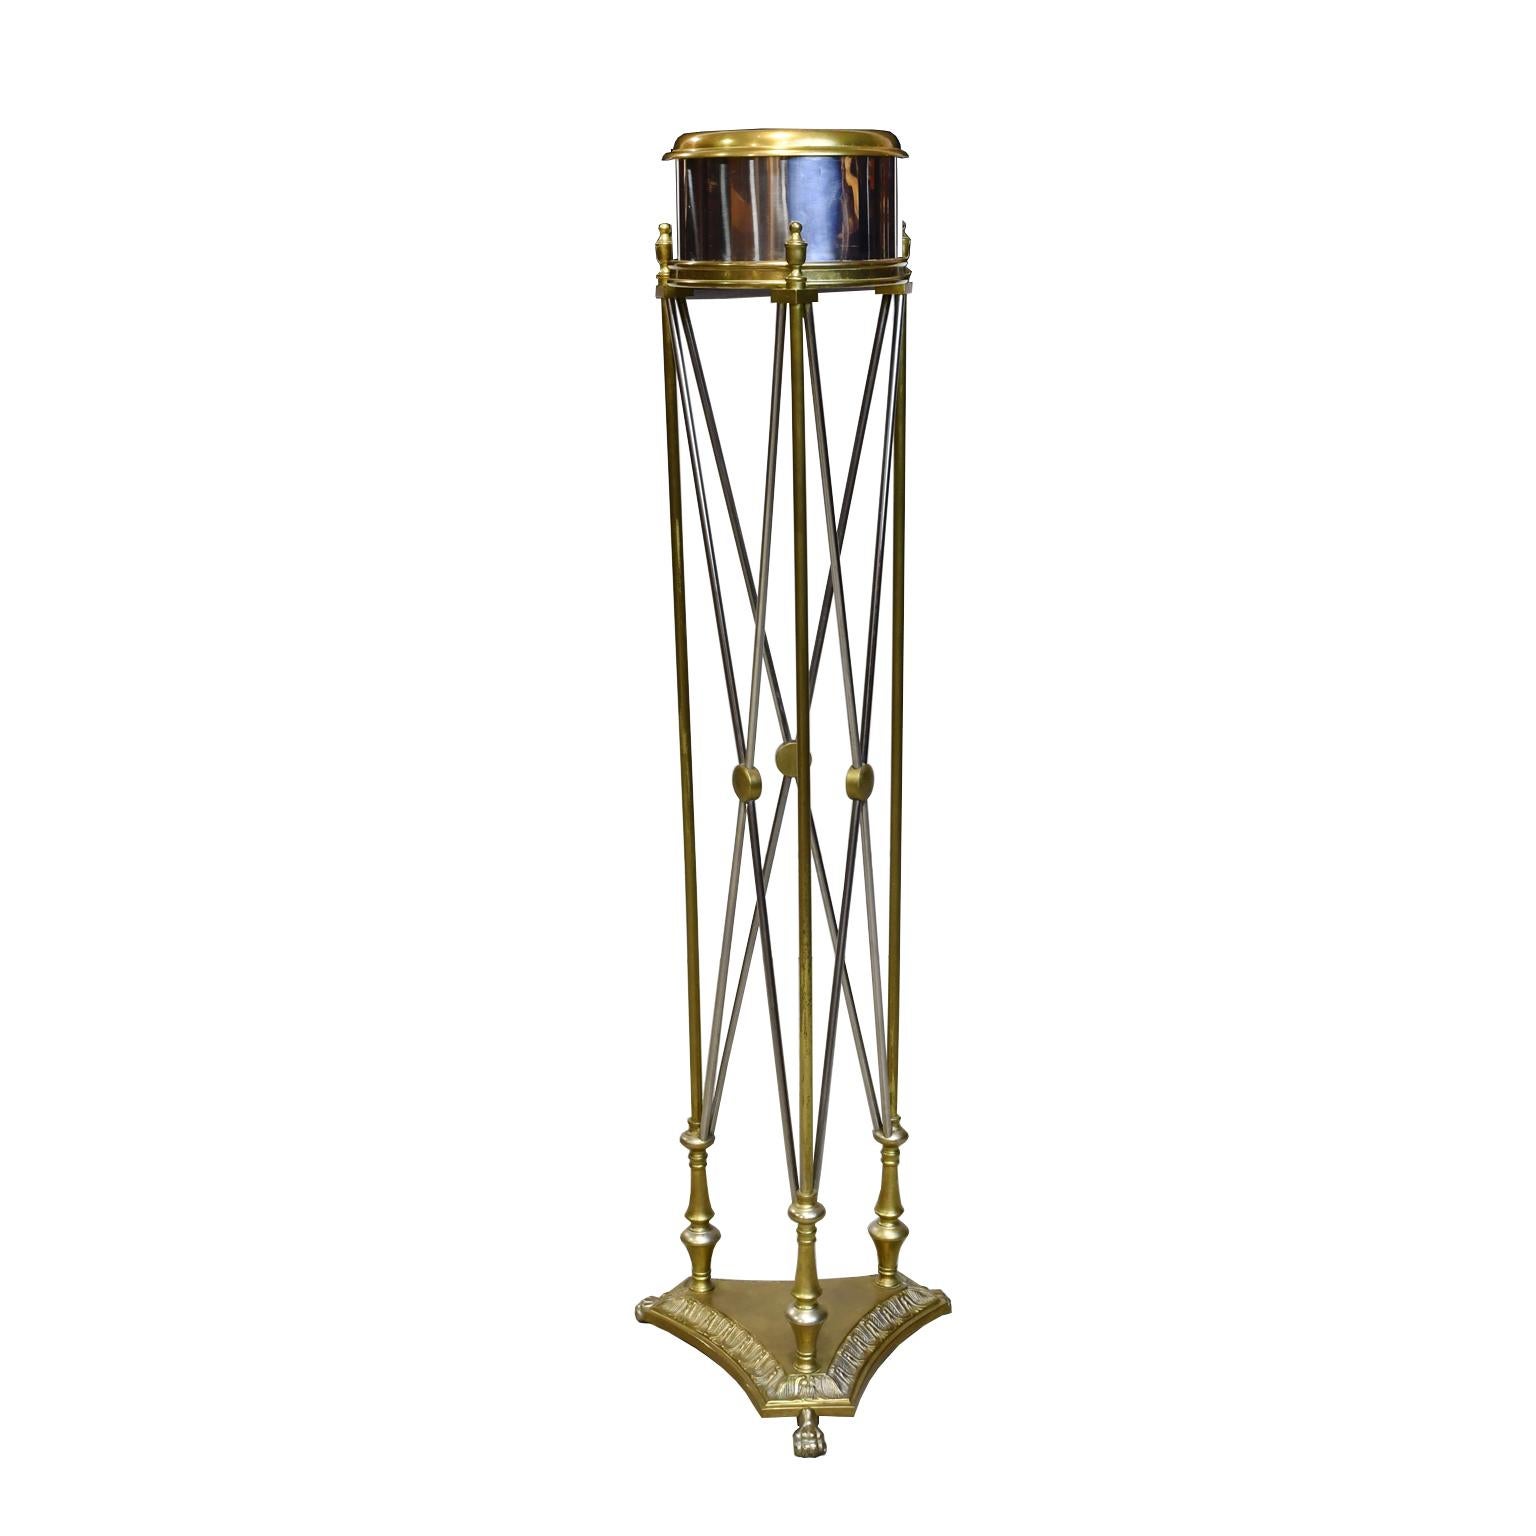 A very handsome vintage jardinière in the Empire style manufactured by Maitland Smith in the 1980s with cylindrical polished-chrome planter trimmed with brass over a cast and fabricated base that is embellished with intersecting rods in chrome and